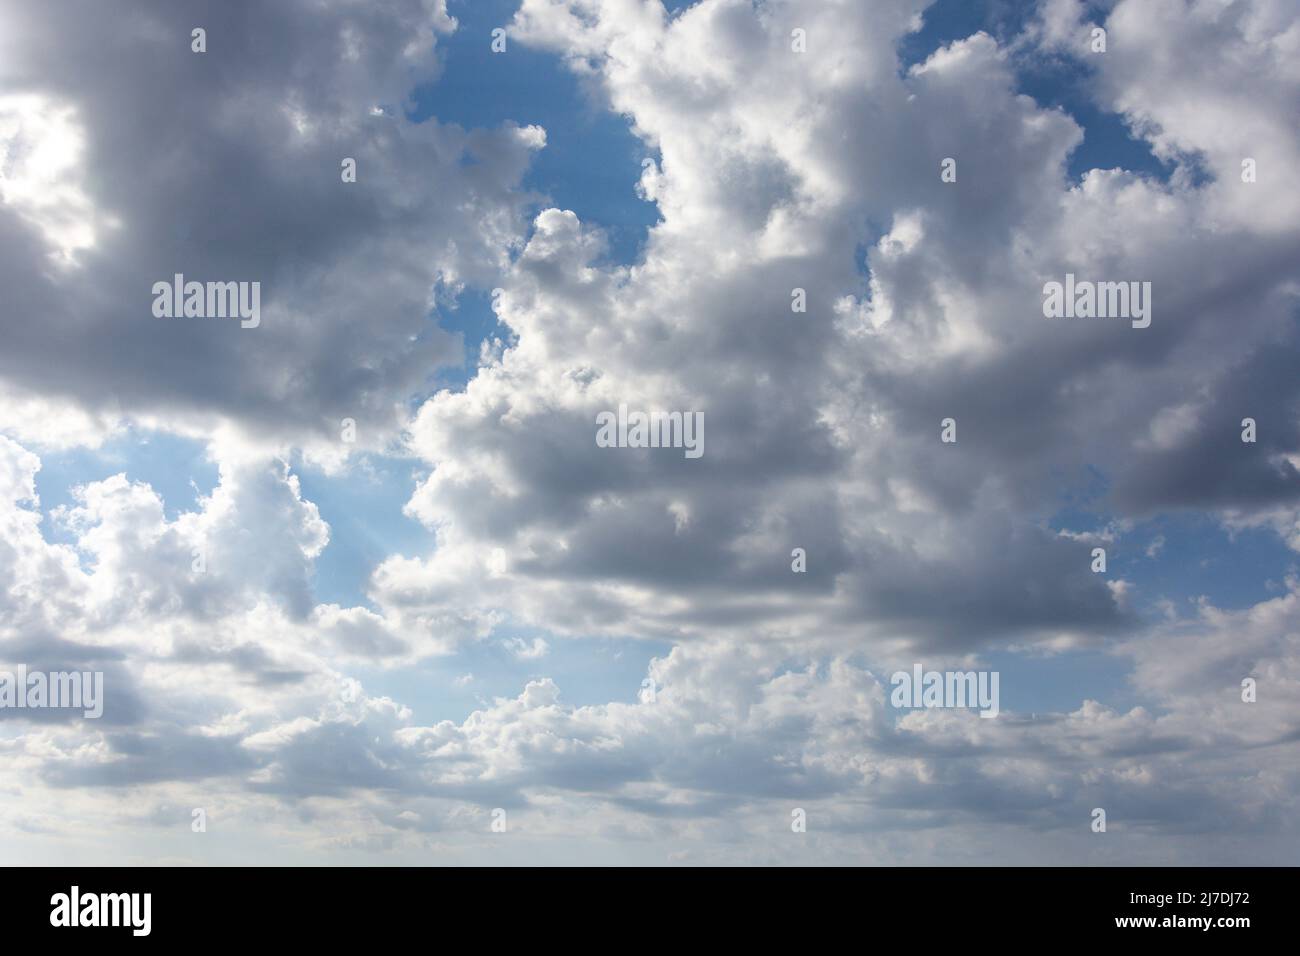 Partly cloudy skies from deck of Marella Explorer II cruise ship, Caribbean Sea, Greater Antilles, Caribbean Stock Photo